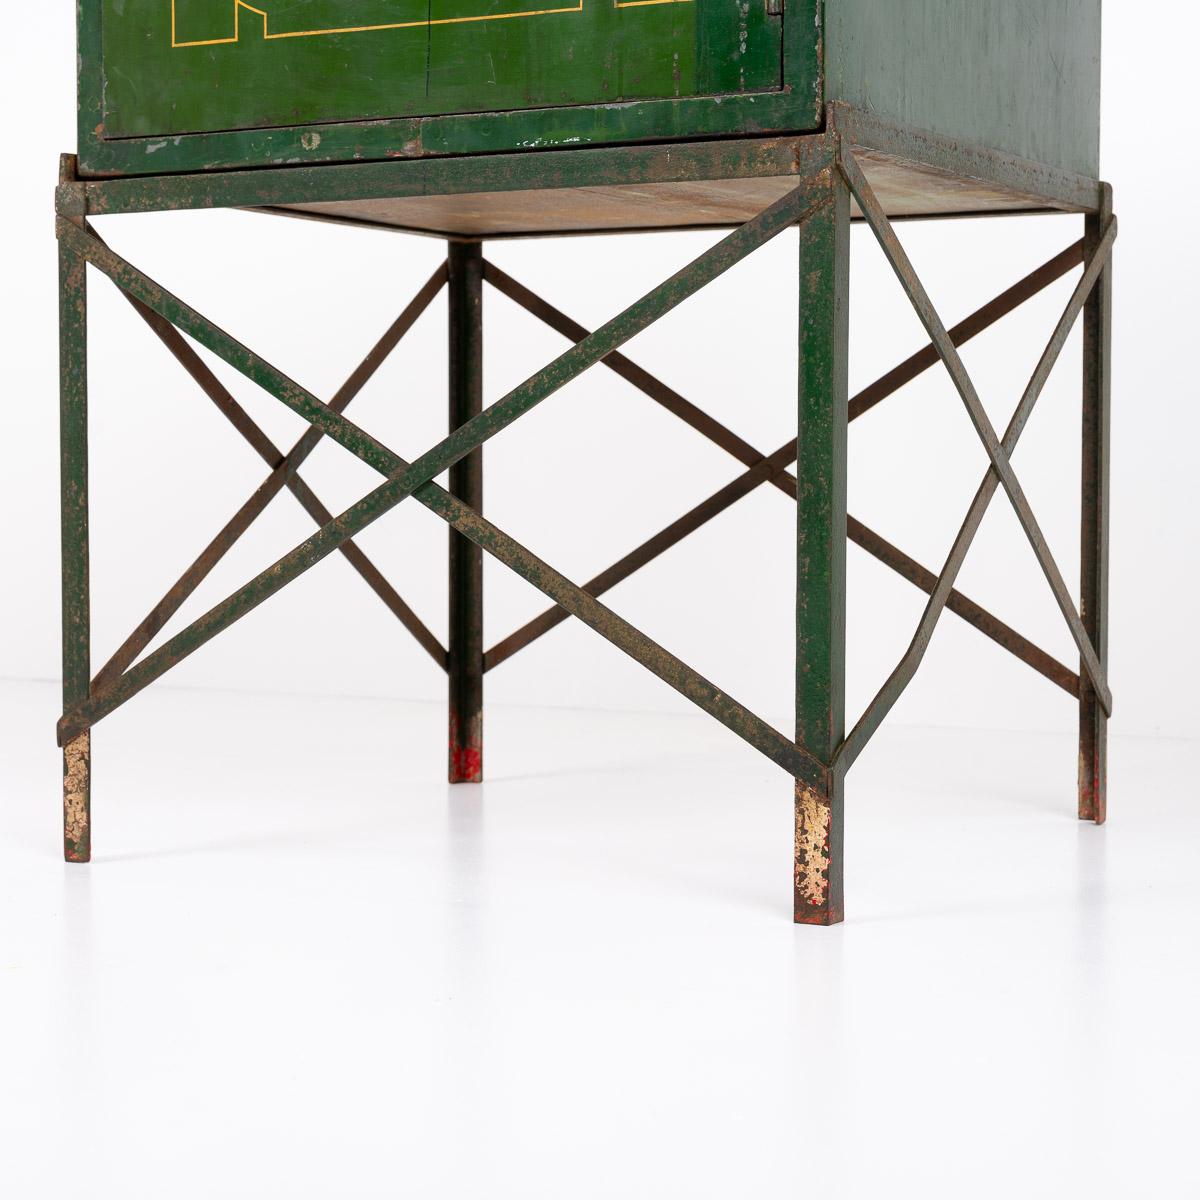 British Art Deco Industrial Green Painted Steel Dead Cabinet from C H Whittingham